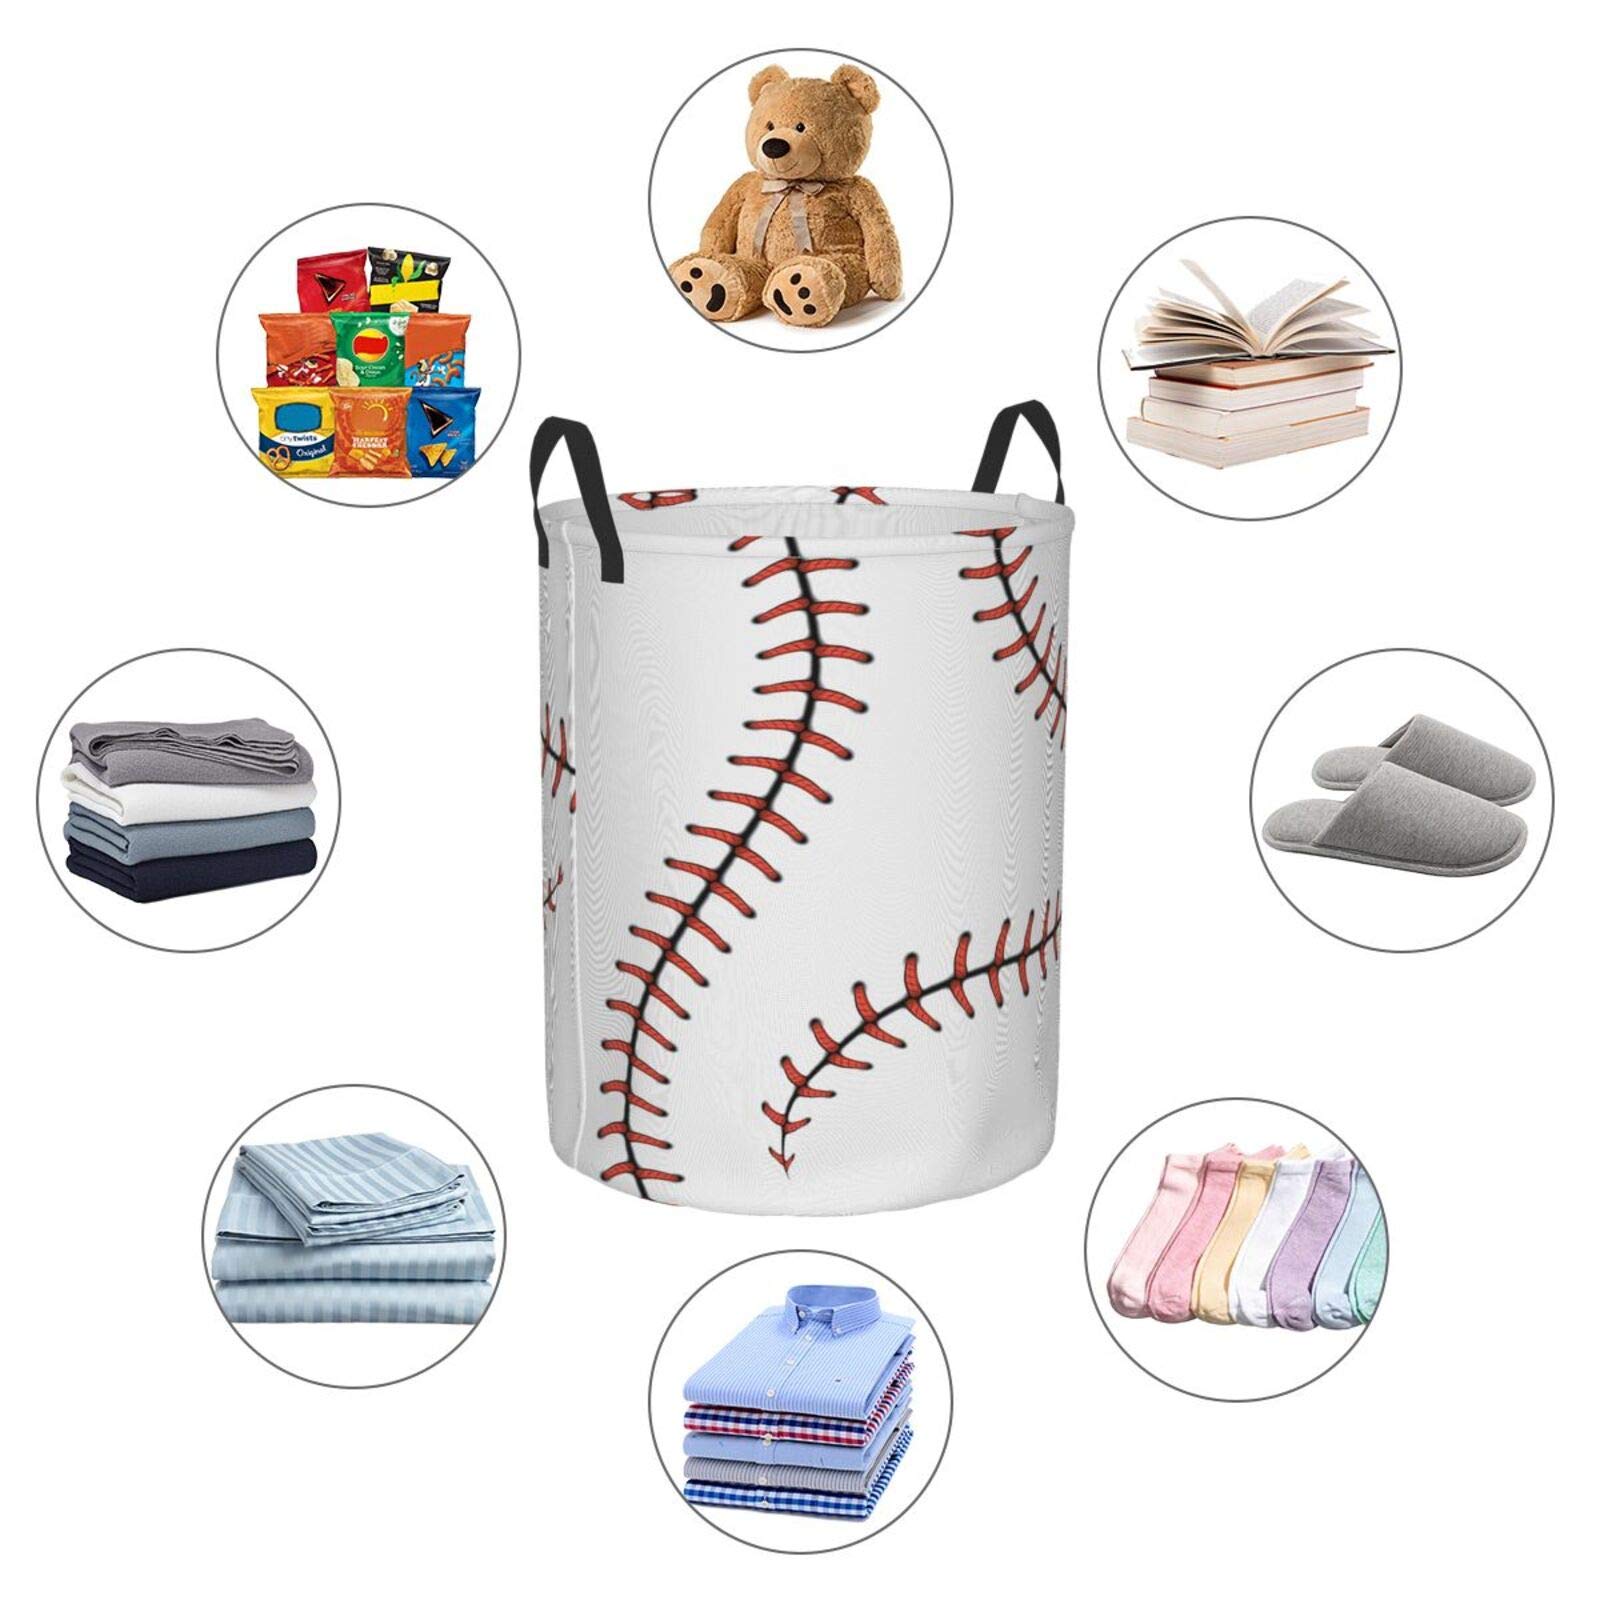 Foruidea Stylish Baseball Stitches Laces Print Laundry Basket,Laundry Hamper,Collapsible Storage Bin,Oxford Fabric Clothes Baskets,Nursery Hamper for Home,Office,Dorm,Gift Basket